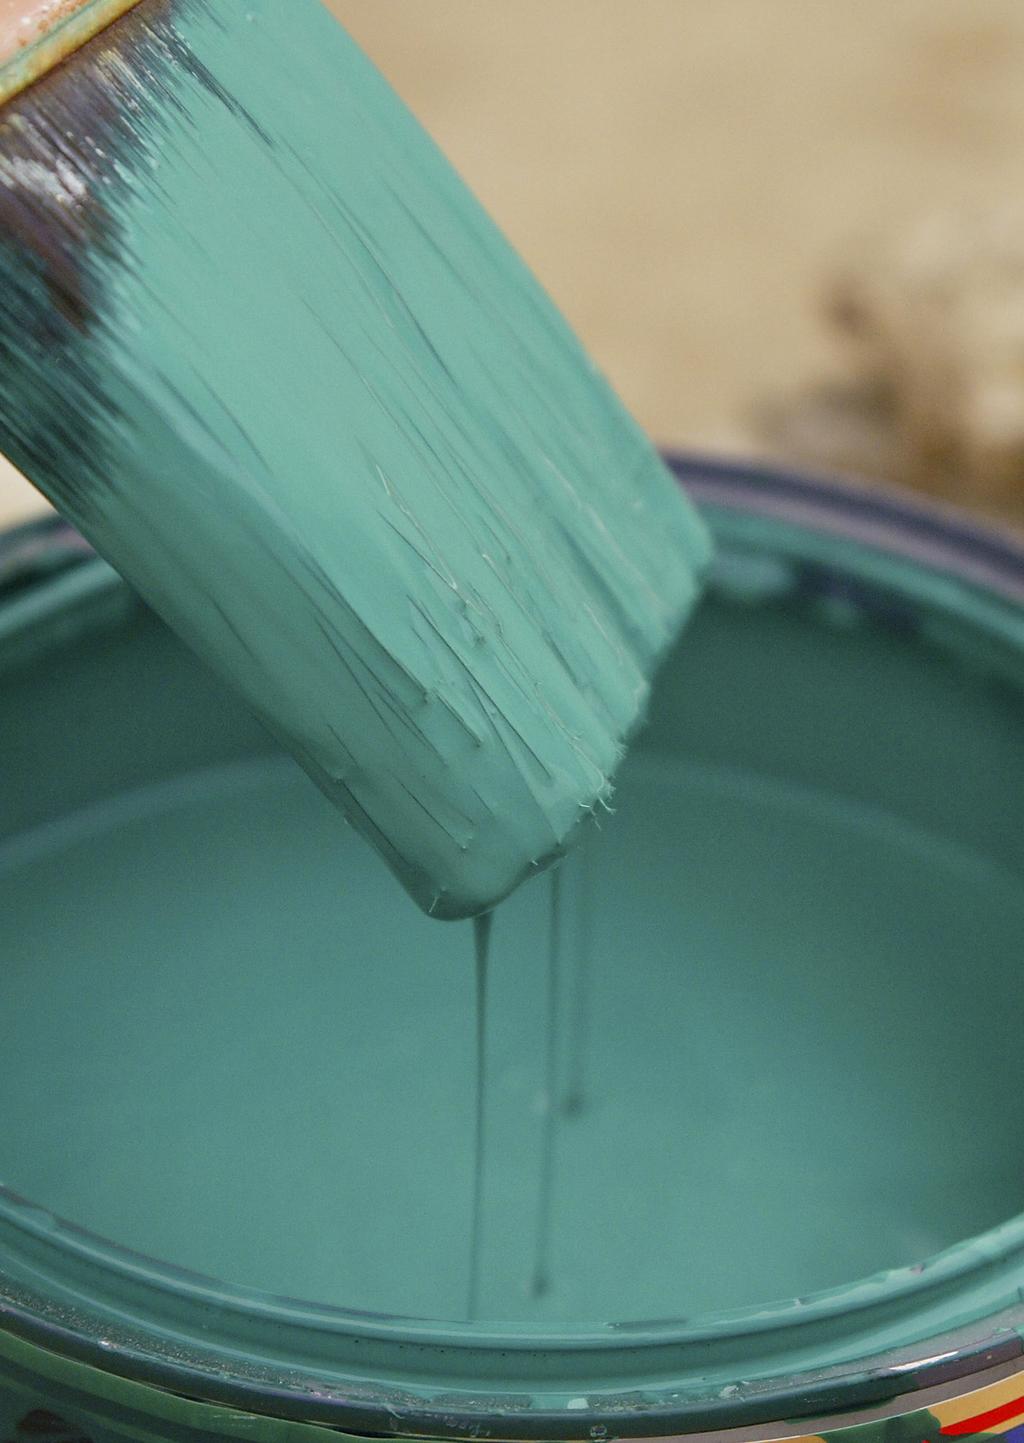 Paints There are two main kinds of paints: oil-based and water-based. Whether for indoor or outdoor use, decide which paints are appropriate for the needs of your healthcare facility.